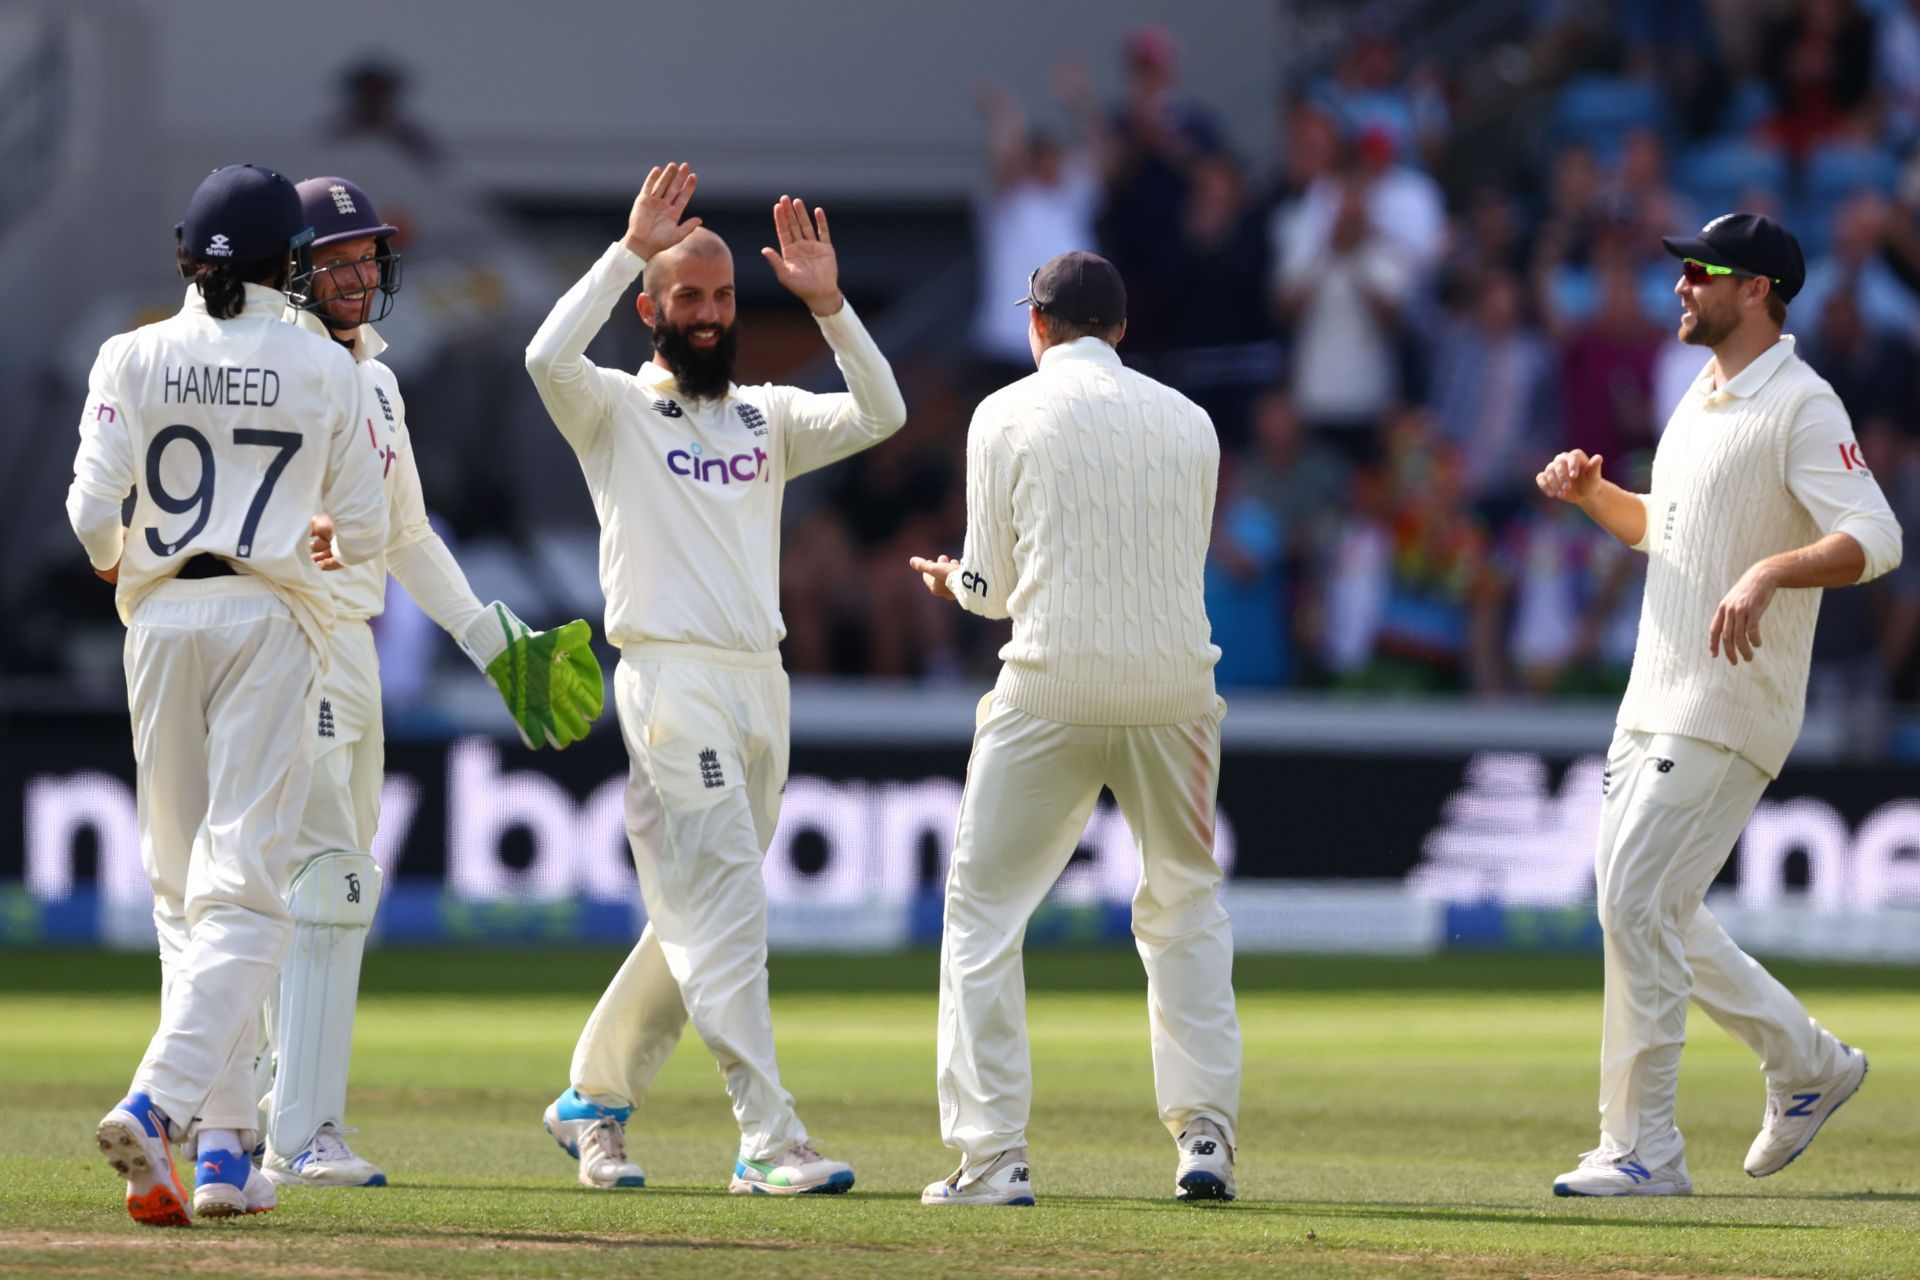 Moeen Ali celebrates a wicket with teammates. (Pic: Getty Images)